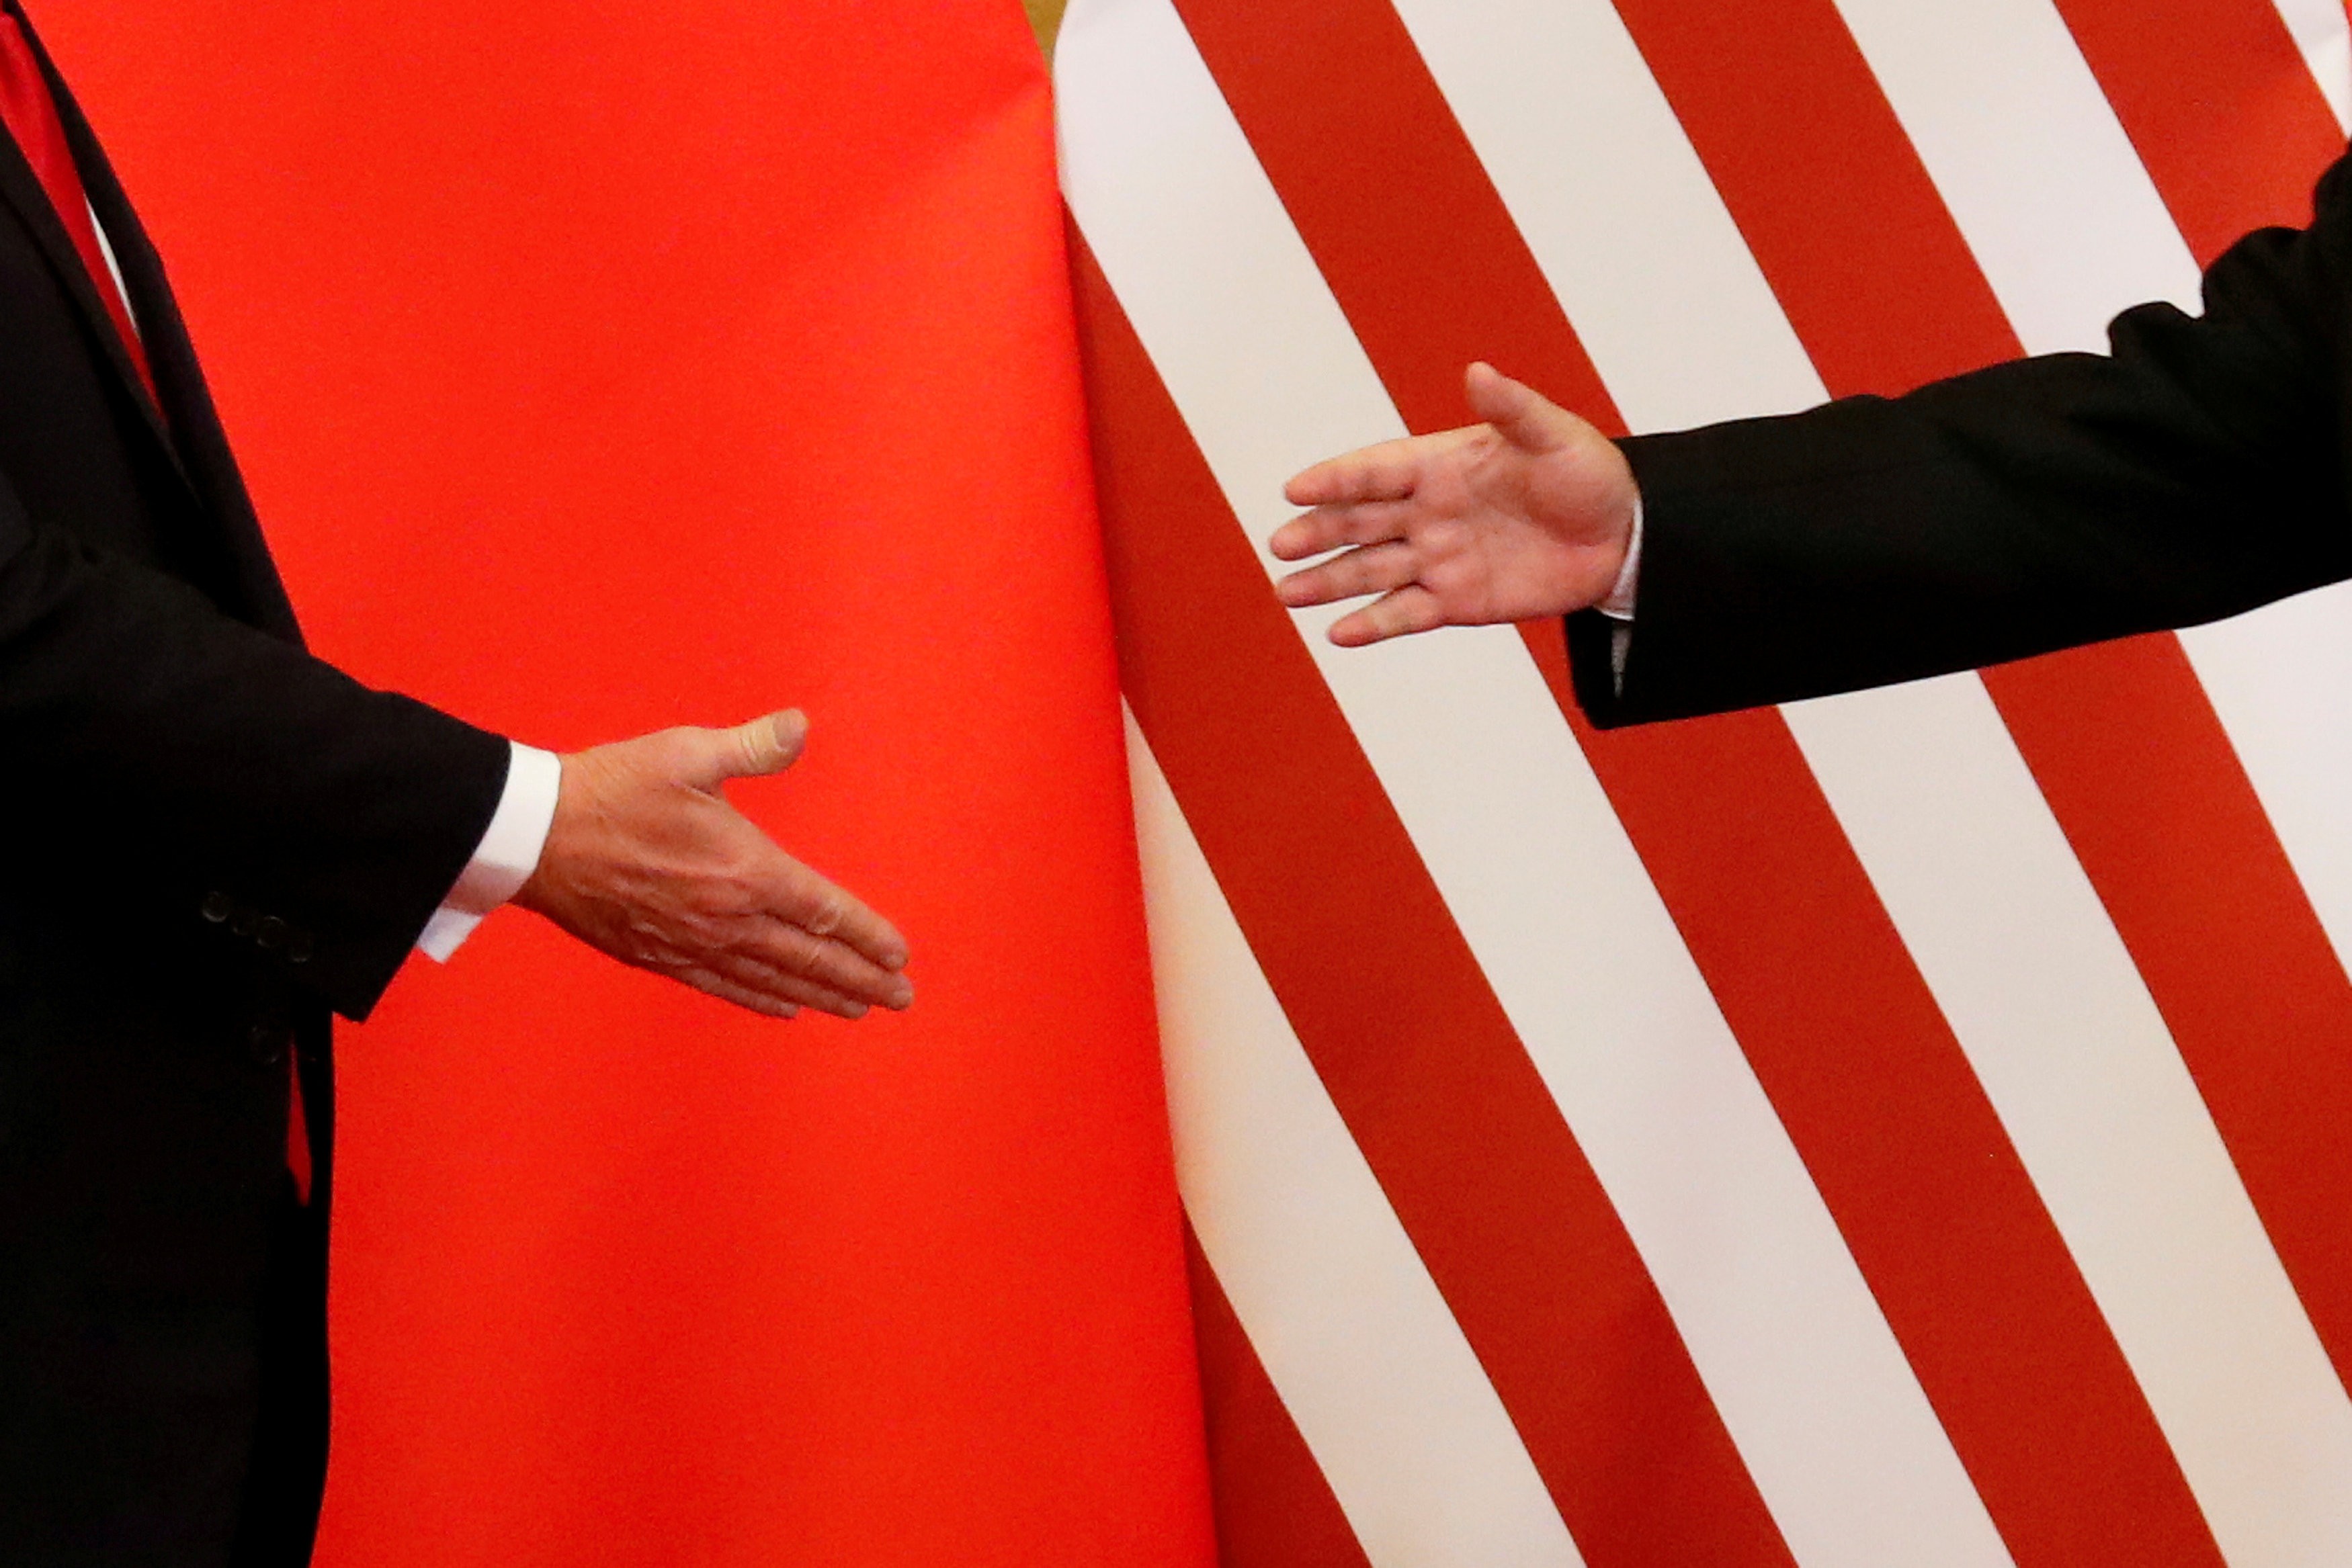 US President Donald Trump and Chinese President Xi Jinping shake hands at the Great Hall of the People in Beijing on November 9, 2017. Photo: Reuters